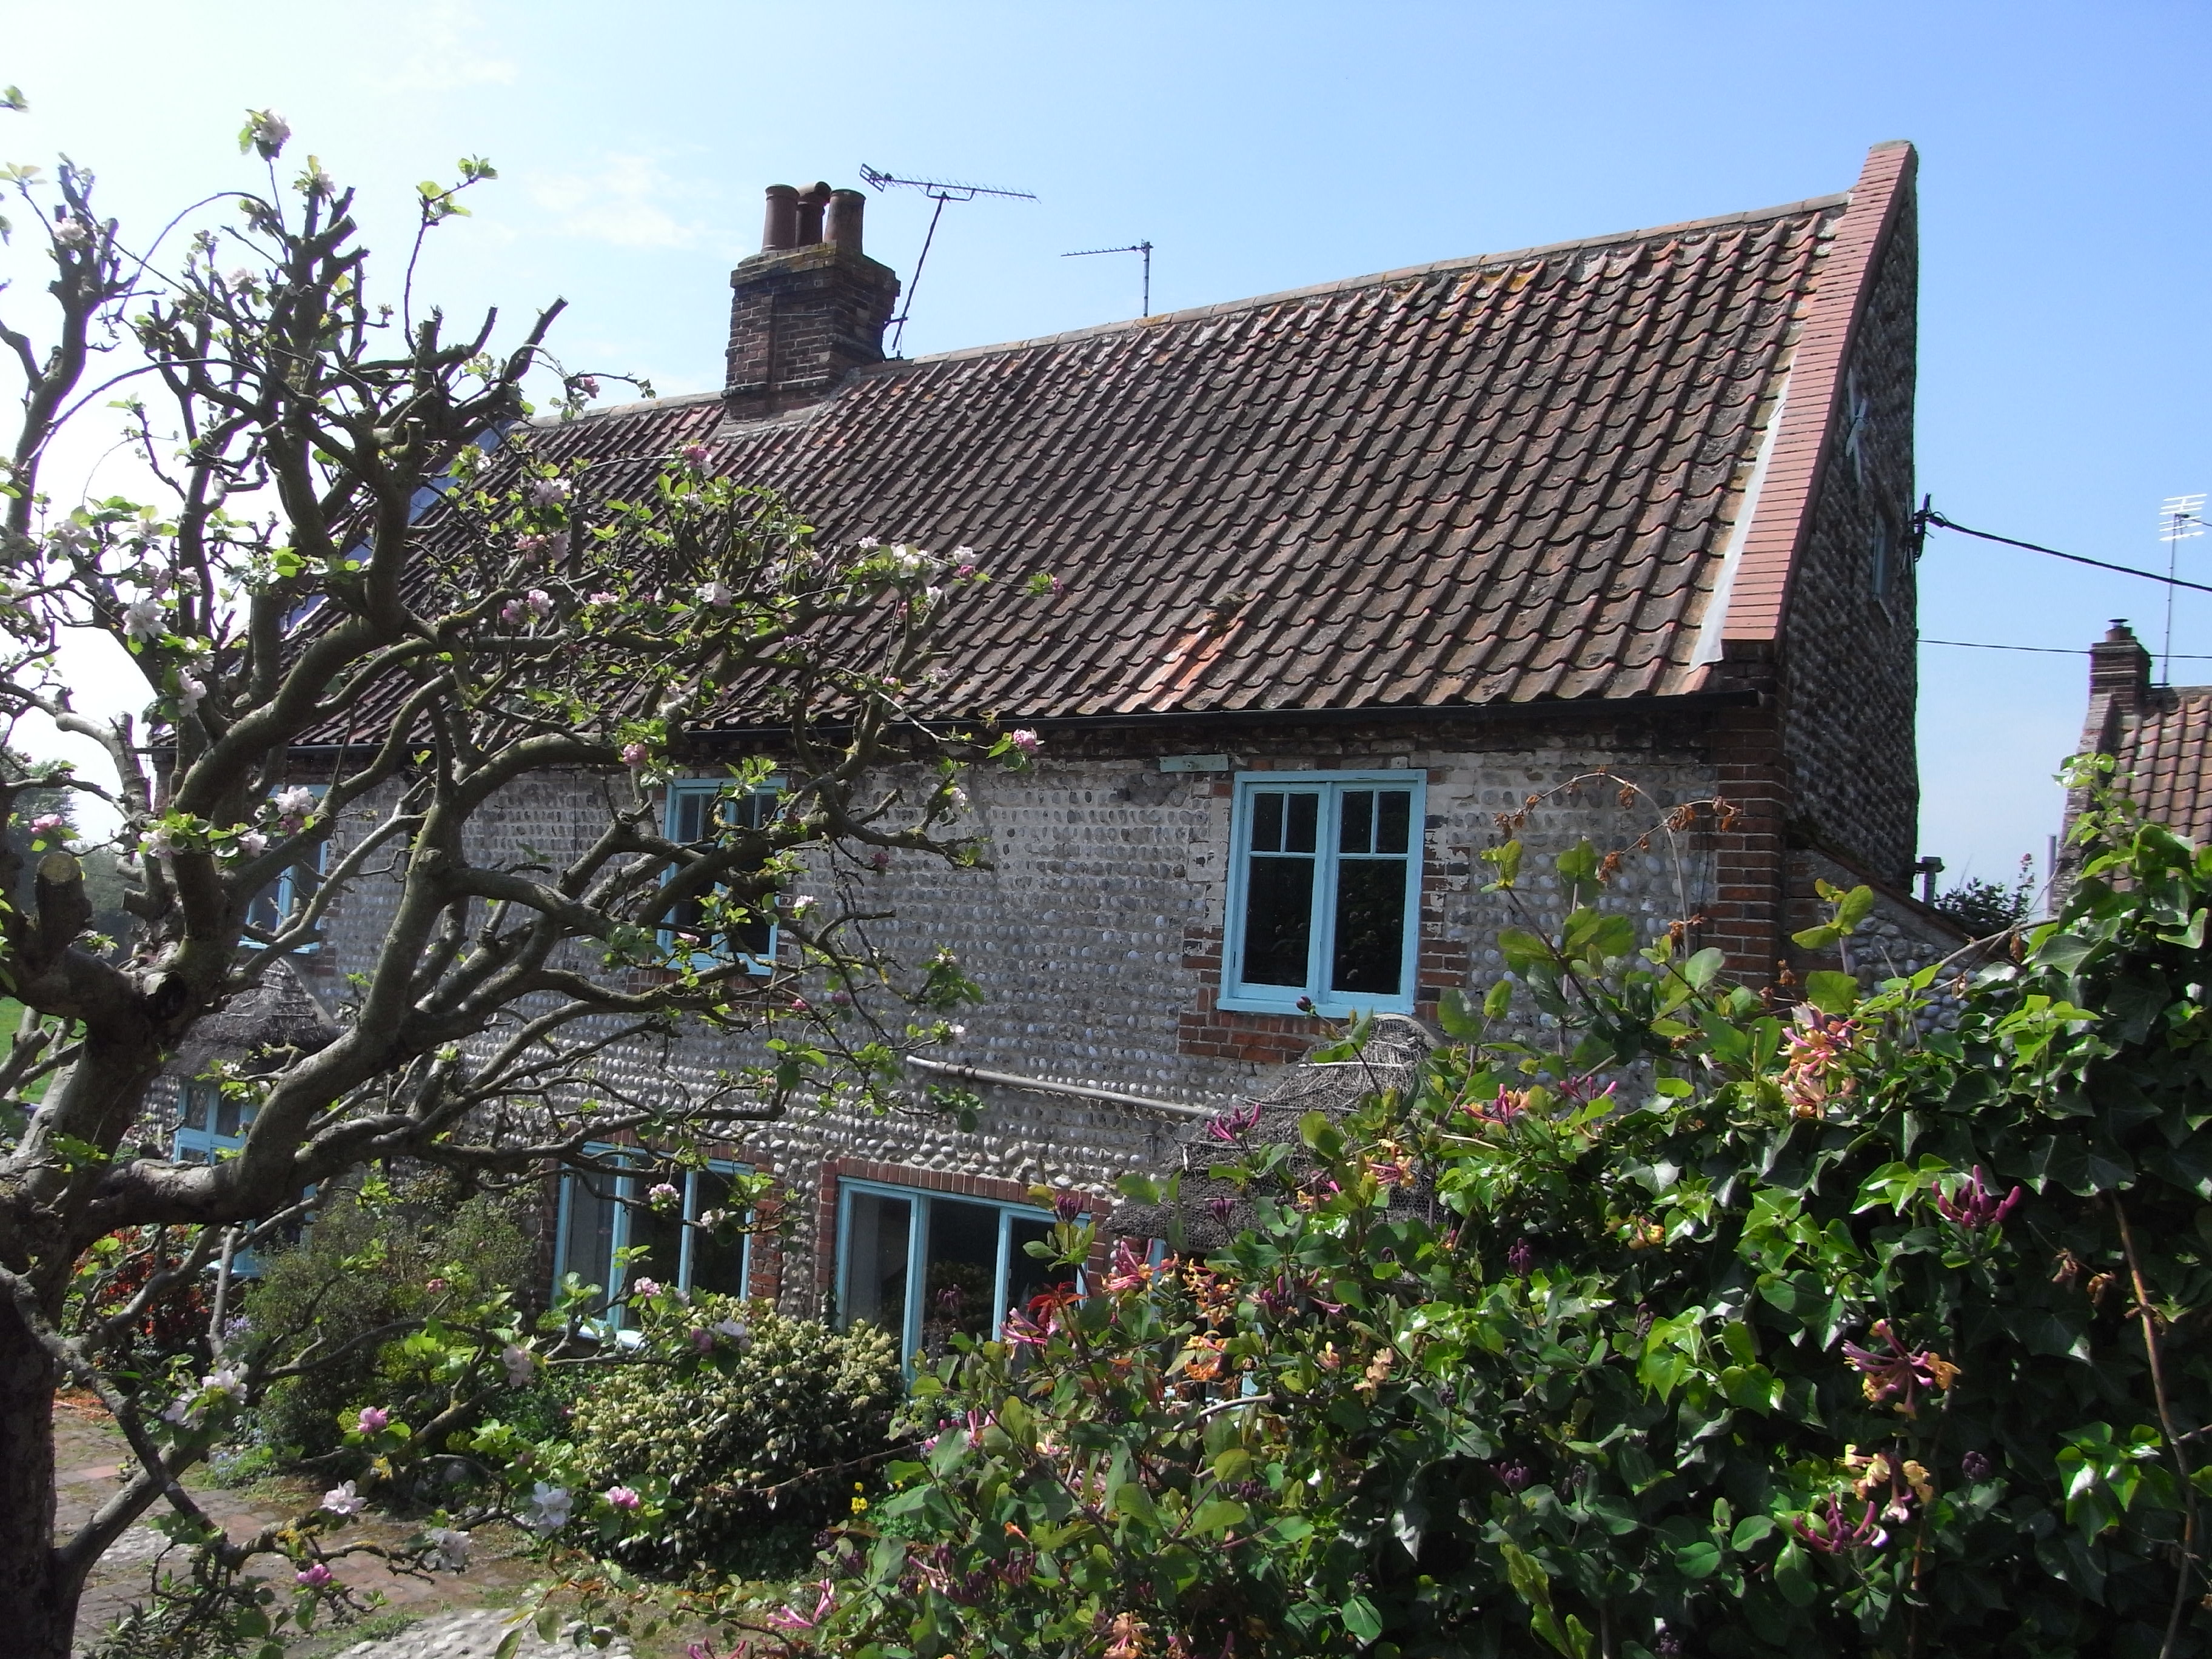 House at Cley, North Norfolk